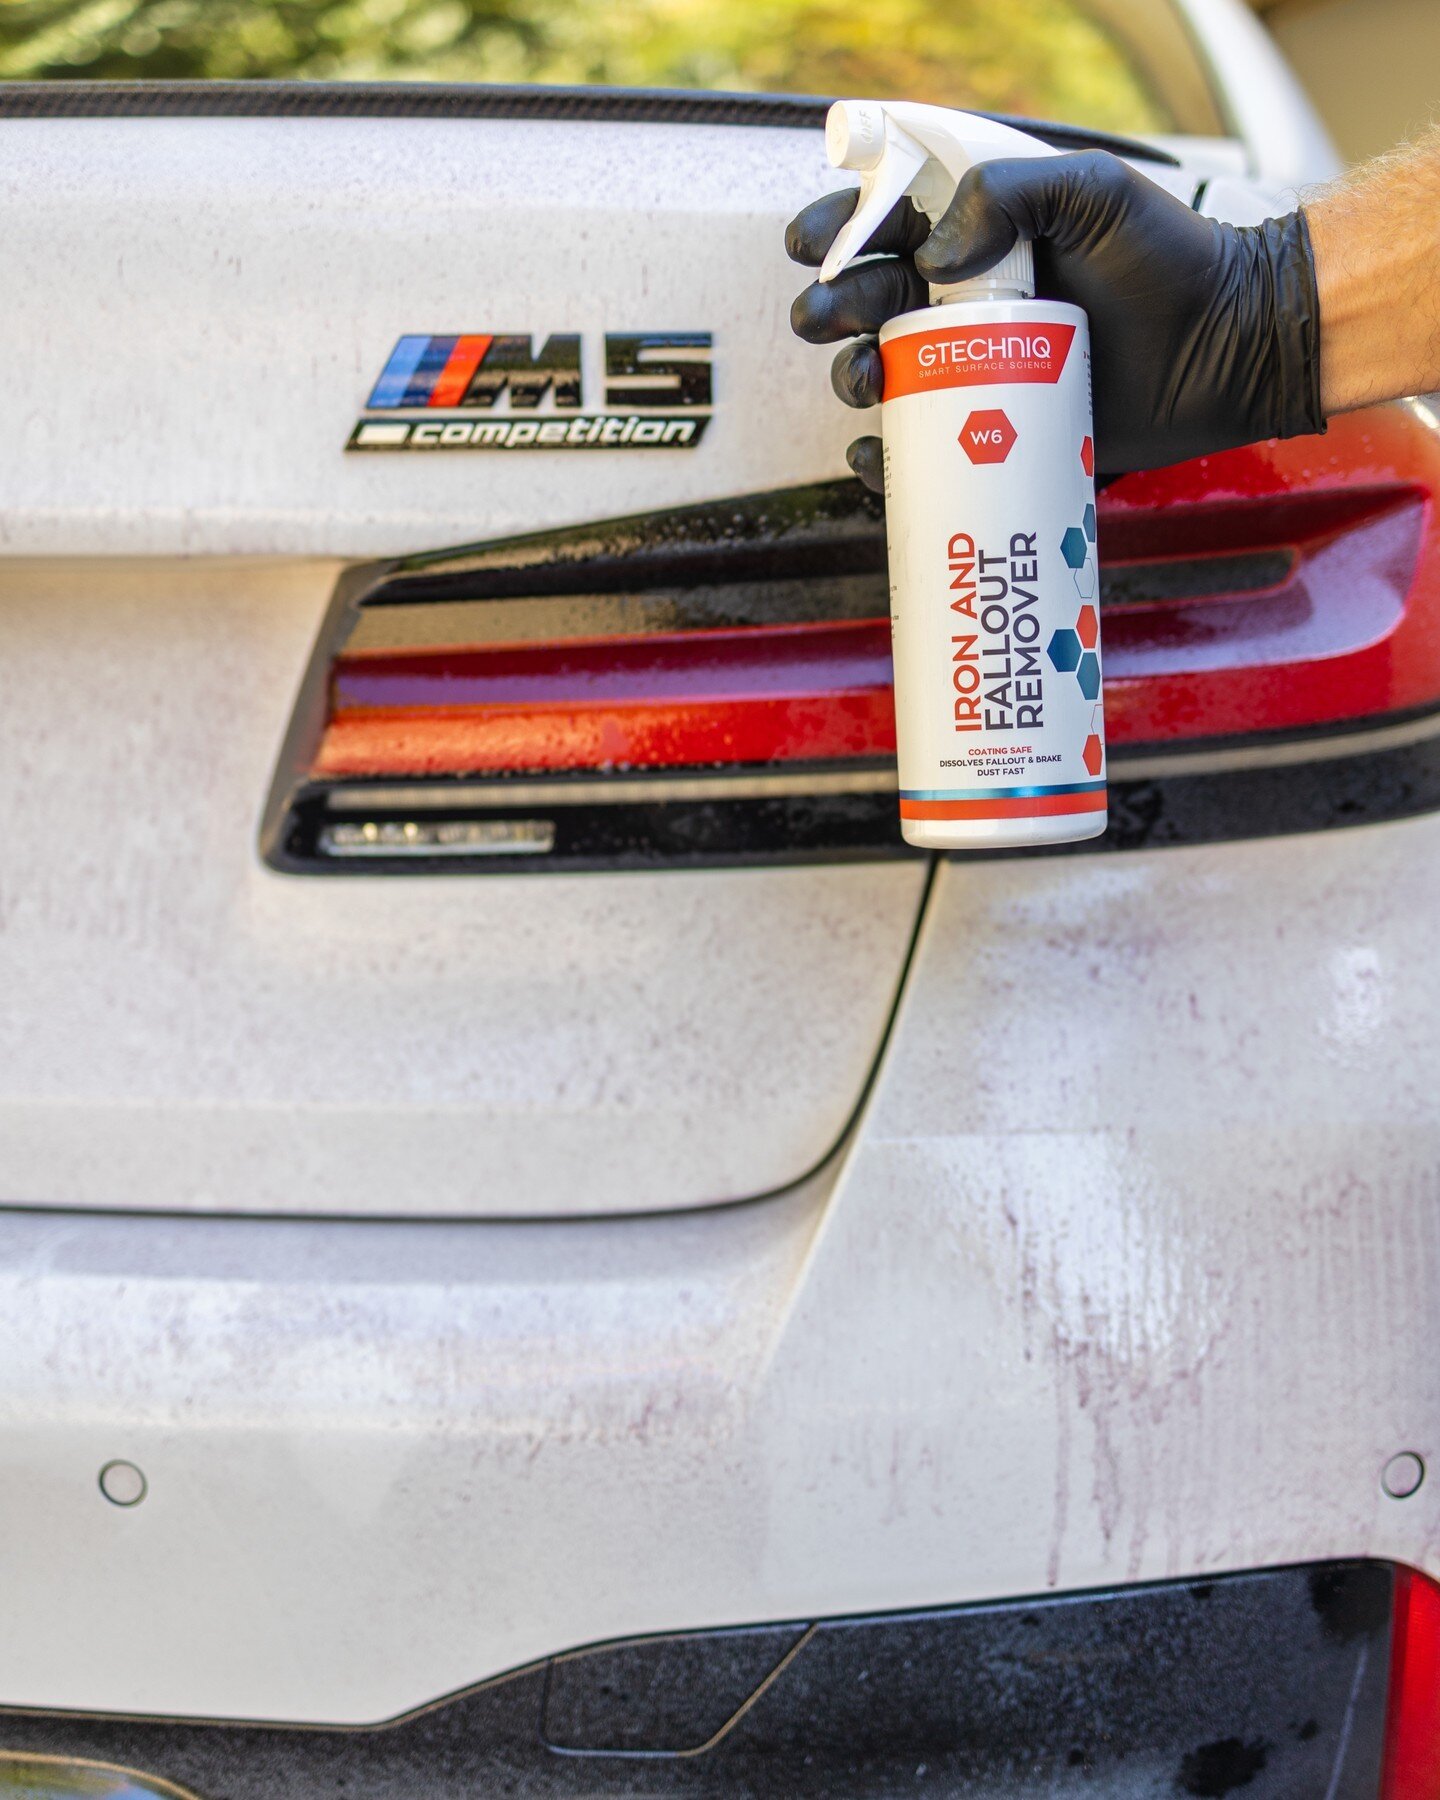 Here at The Detail Center, we take the preparation process seriously, which includes decontamination. Our customers seeing the best results possible is important to us; decontaminating with Gtechniq's Iron and Fallout Remover ensures just that. W6 re